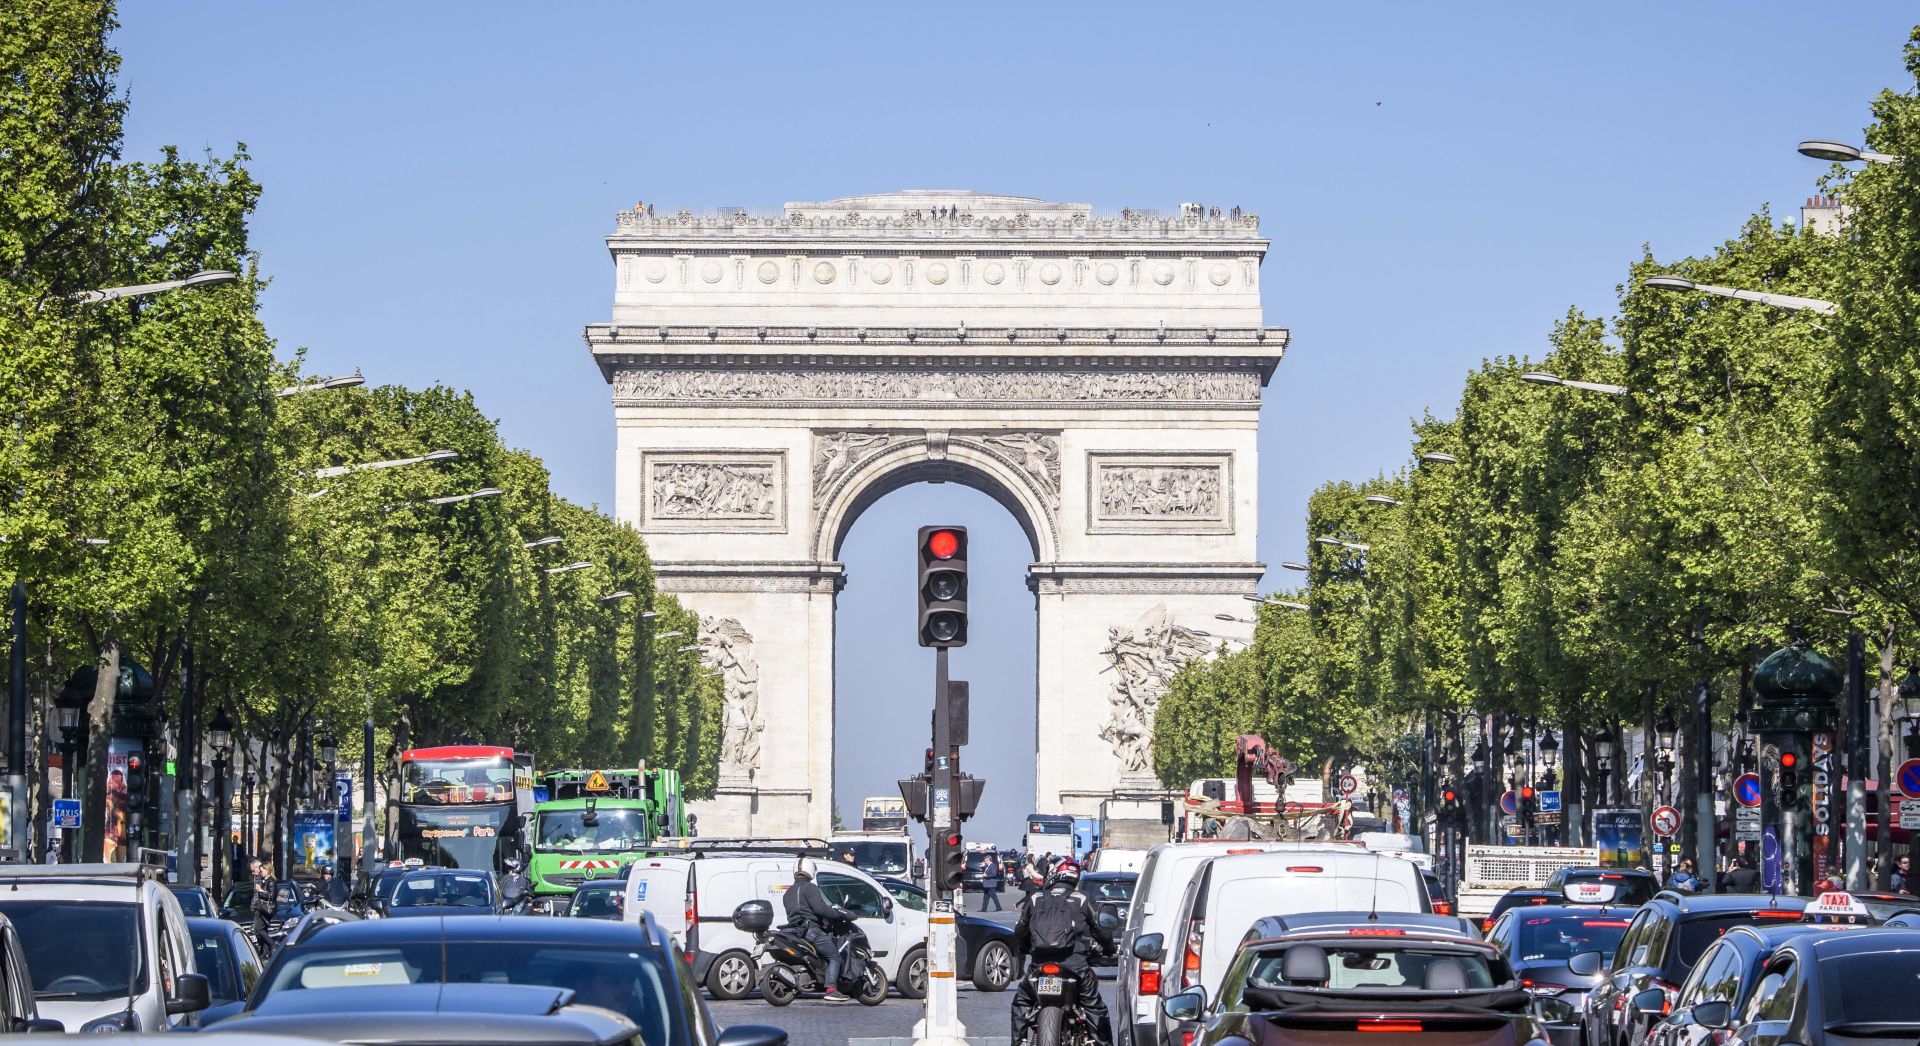 epa05918897 View of the traffic jam at the Champs Elysee avenue near the Arc de Triomphe in Paris, France, 21 April 2017. A police officer the previous day was killed along with the attacker in a terror attack on the Champs Elysees. A total of three police officers were shot at on the city's famous boulevard, with their suspected attacker killed by security forces.  EPA/CHRISTOPHE PETIT TESSON